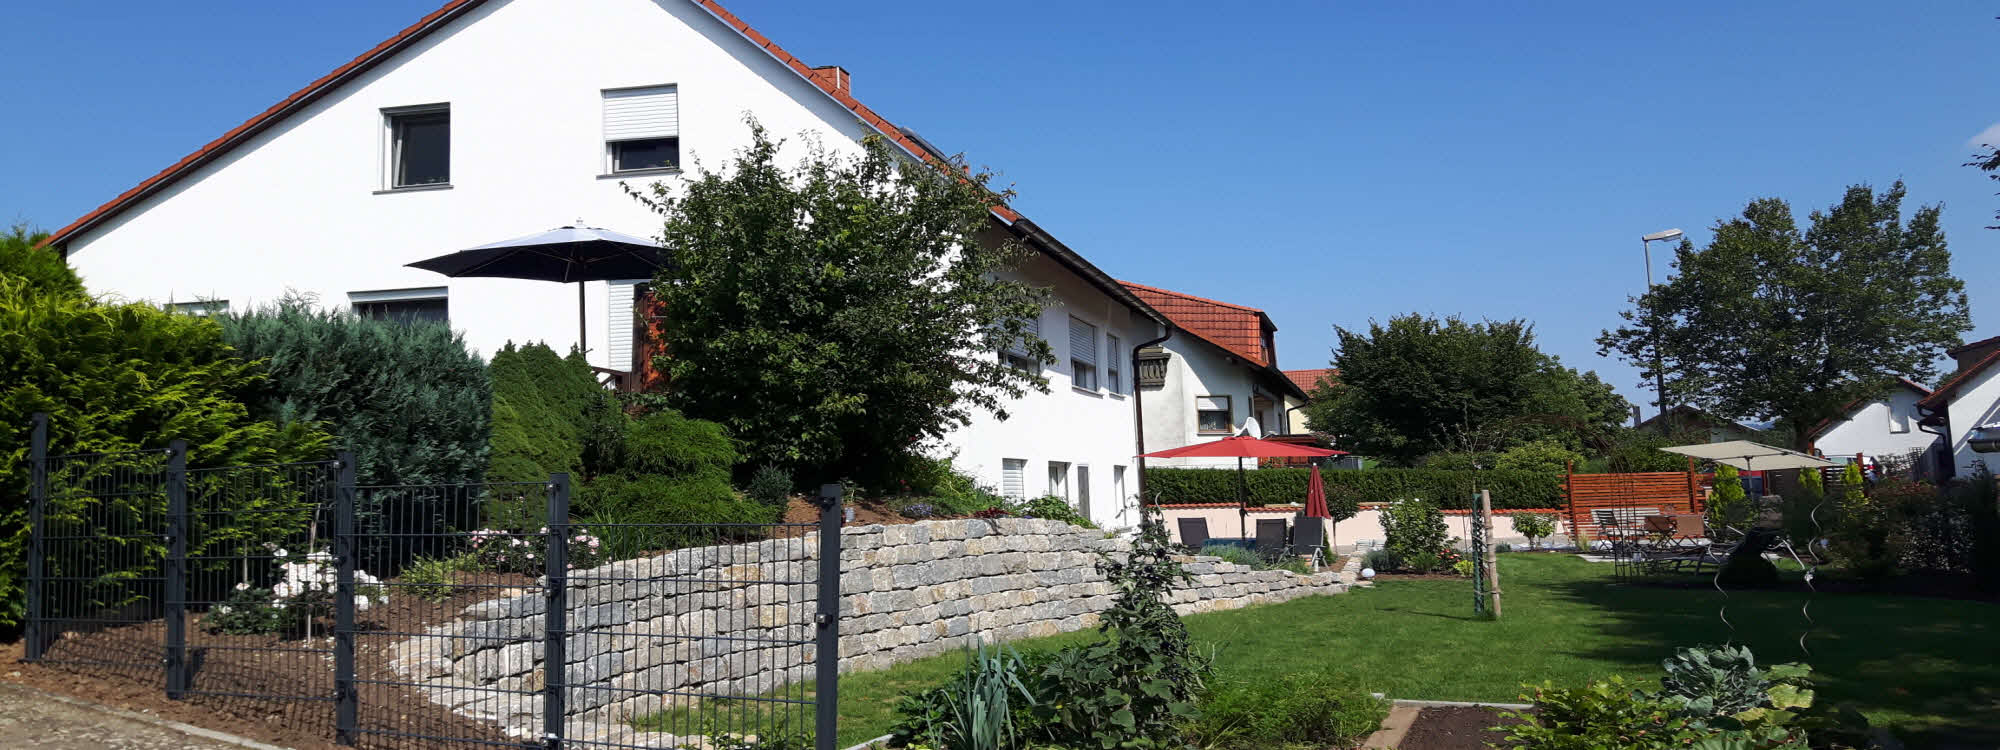 Holiday flat close to Bamberg: Garden and House